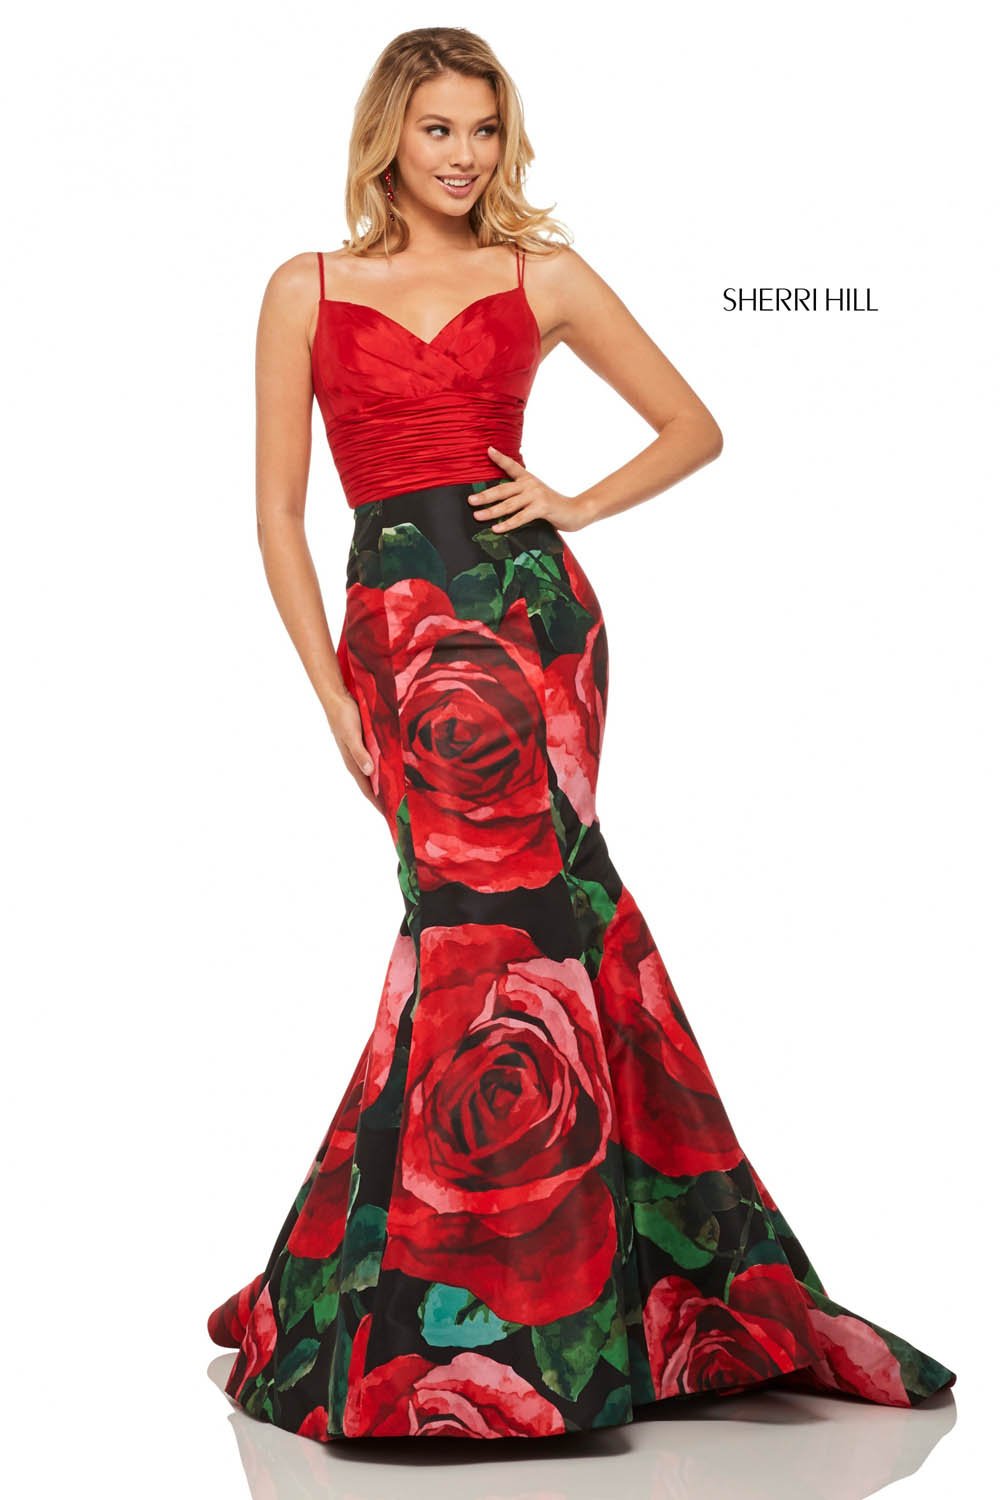 Sherri Hill 52930 dress images in these colors: Red Black Print.